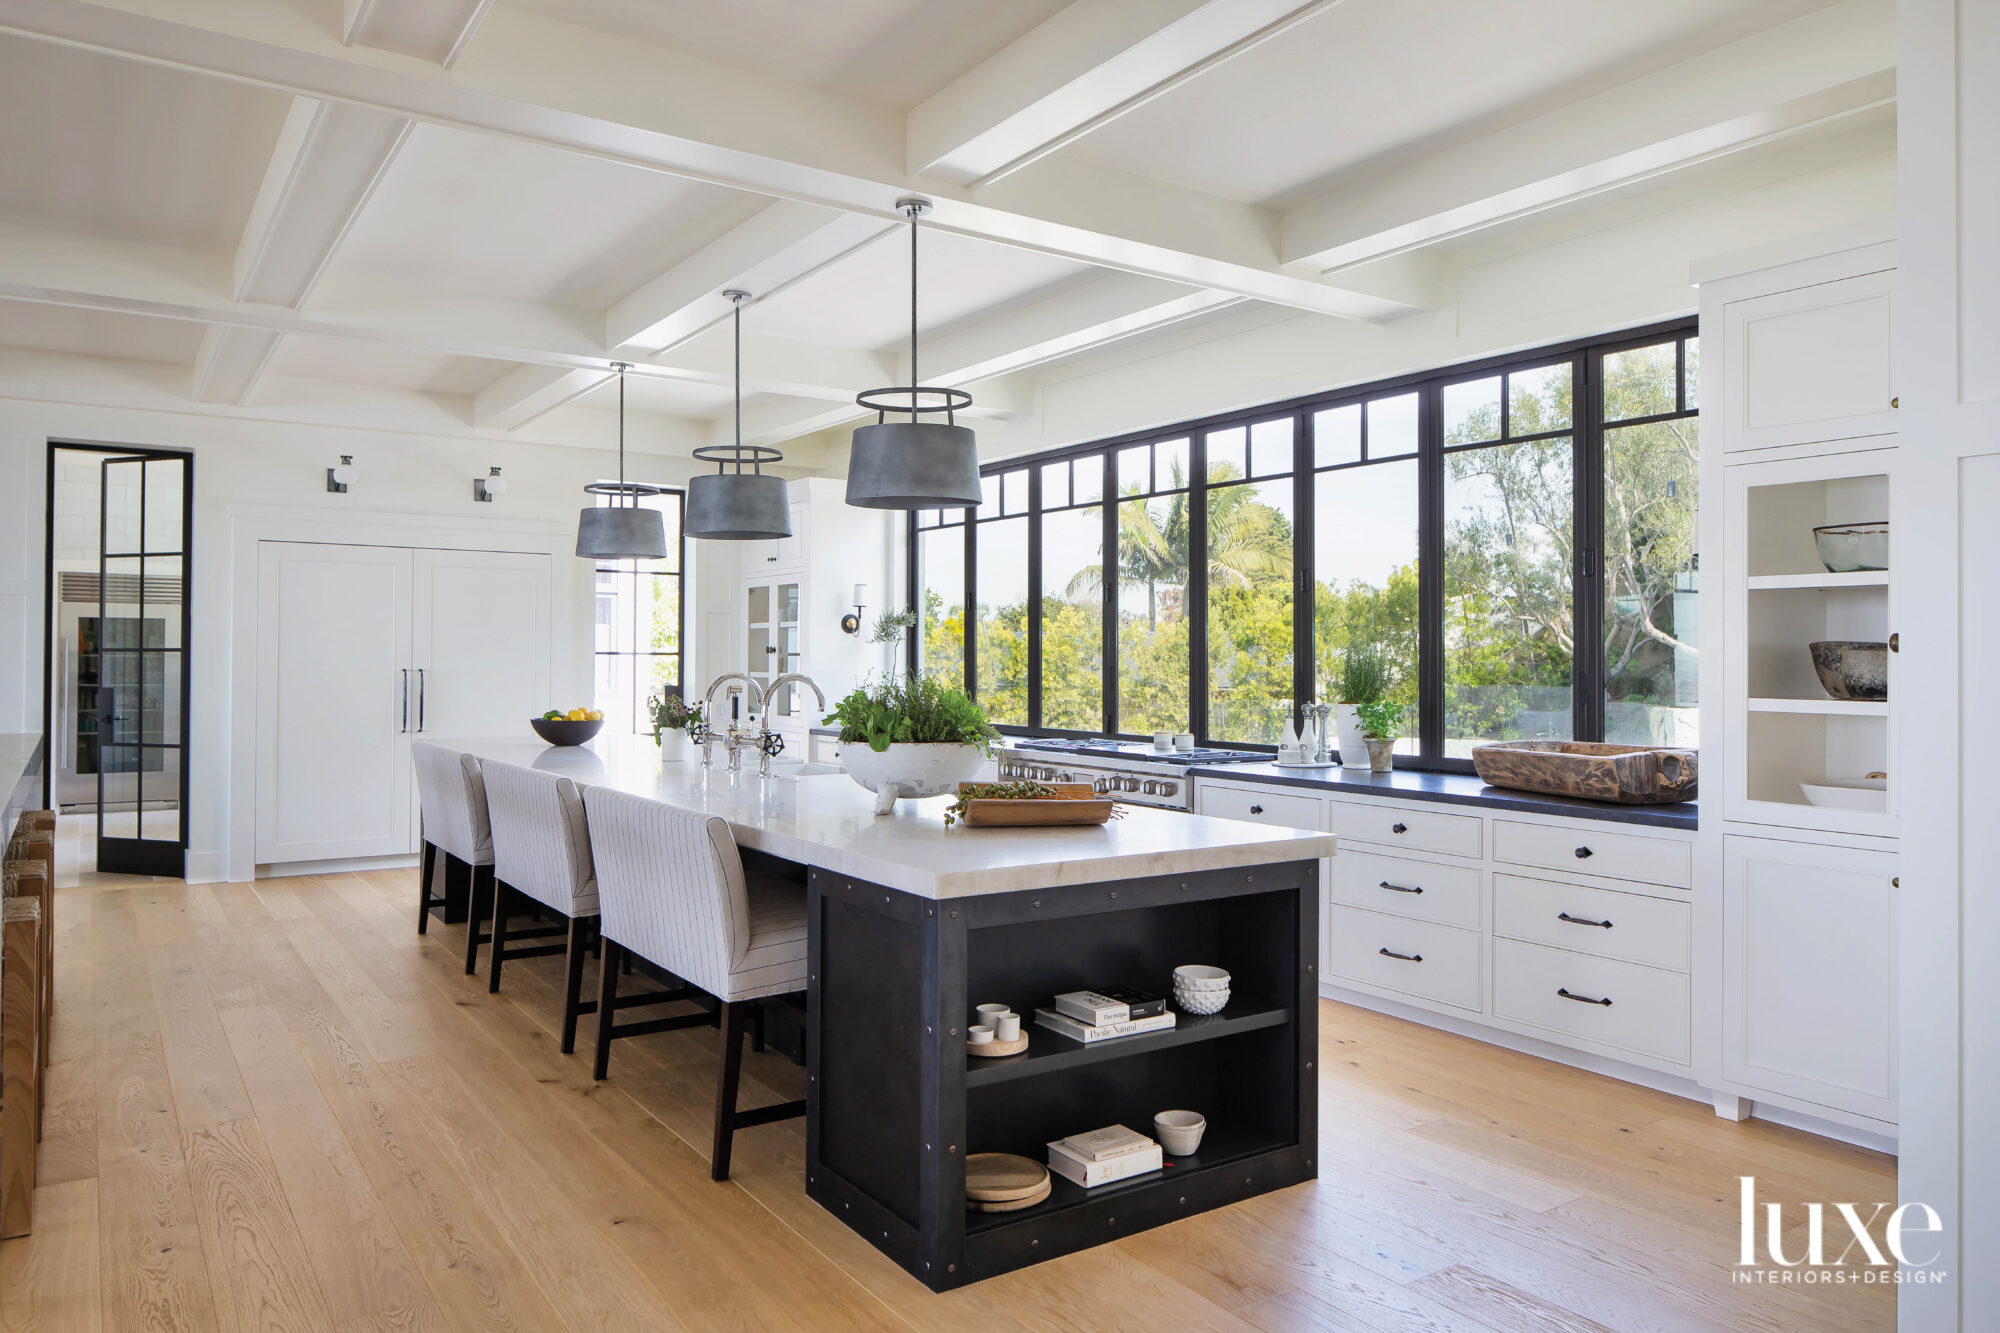 Kitchen view facing island and long windows